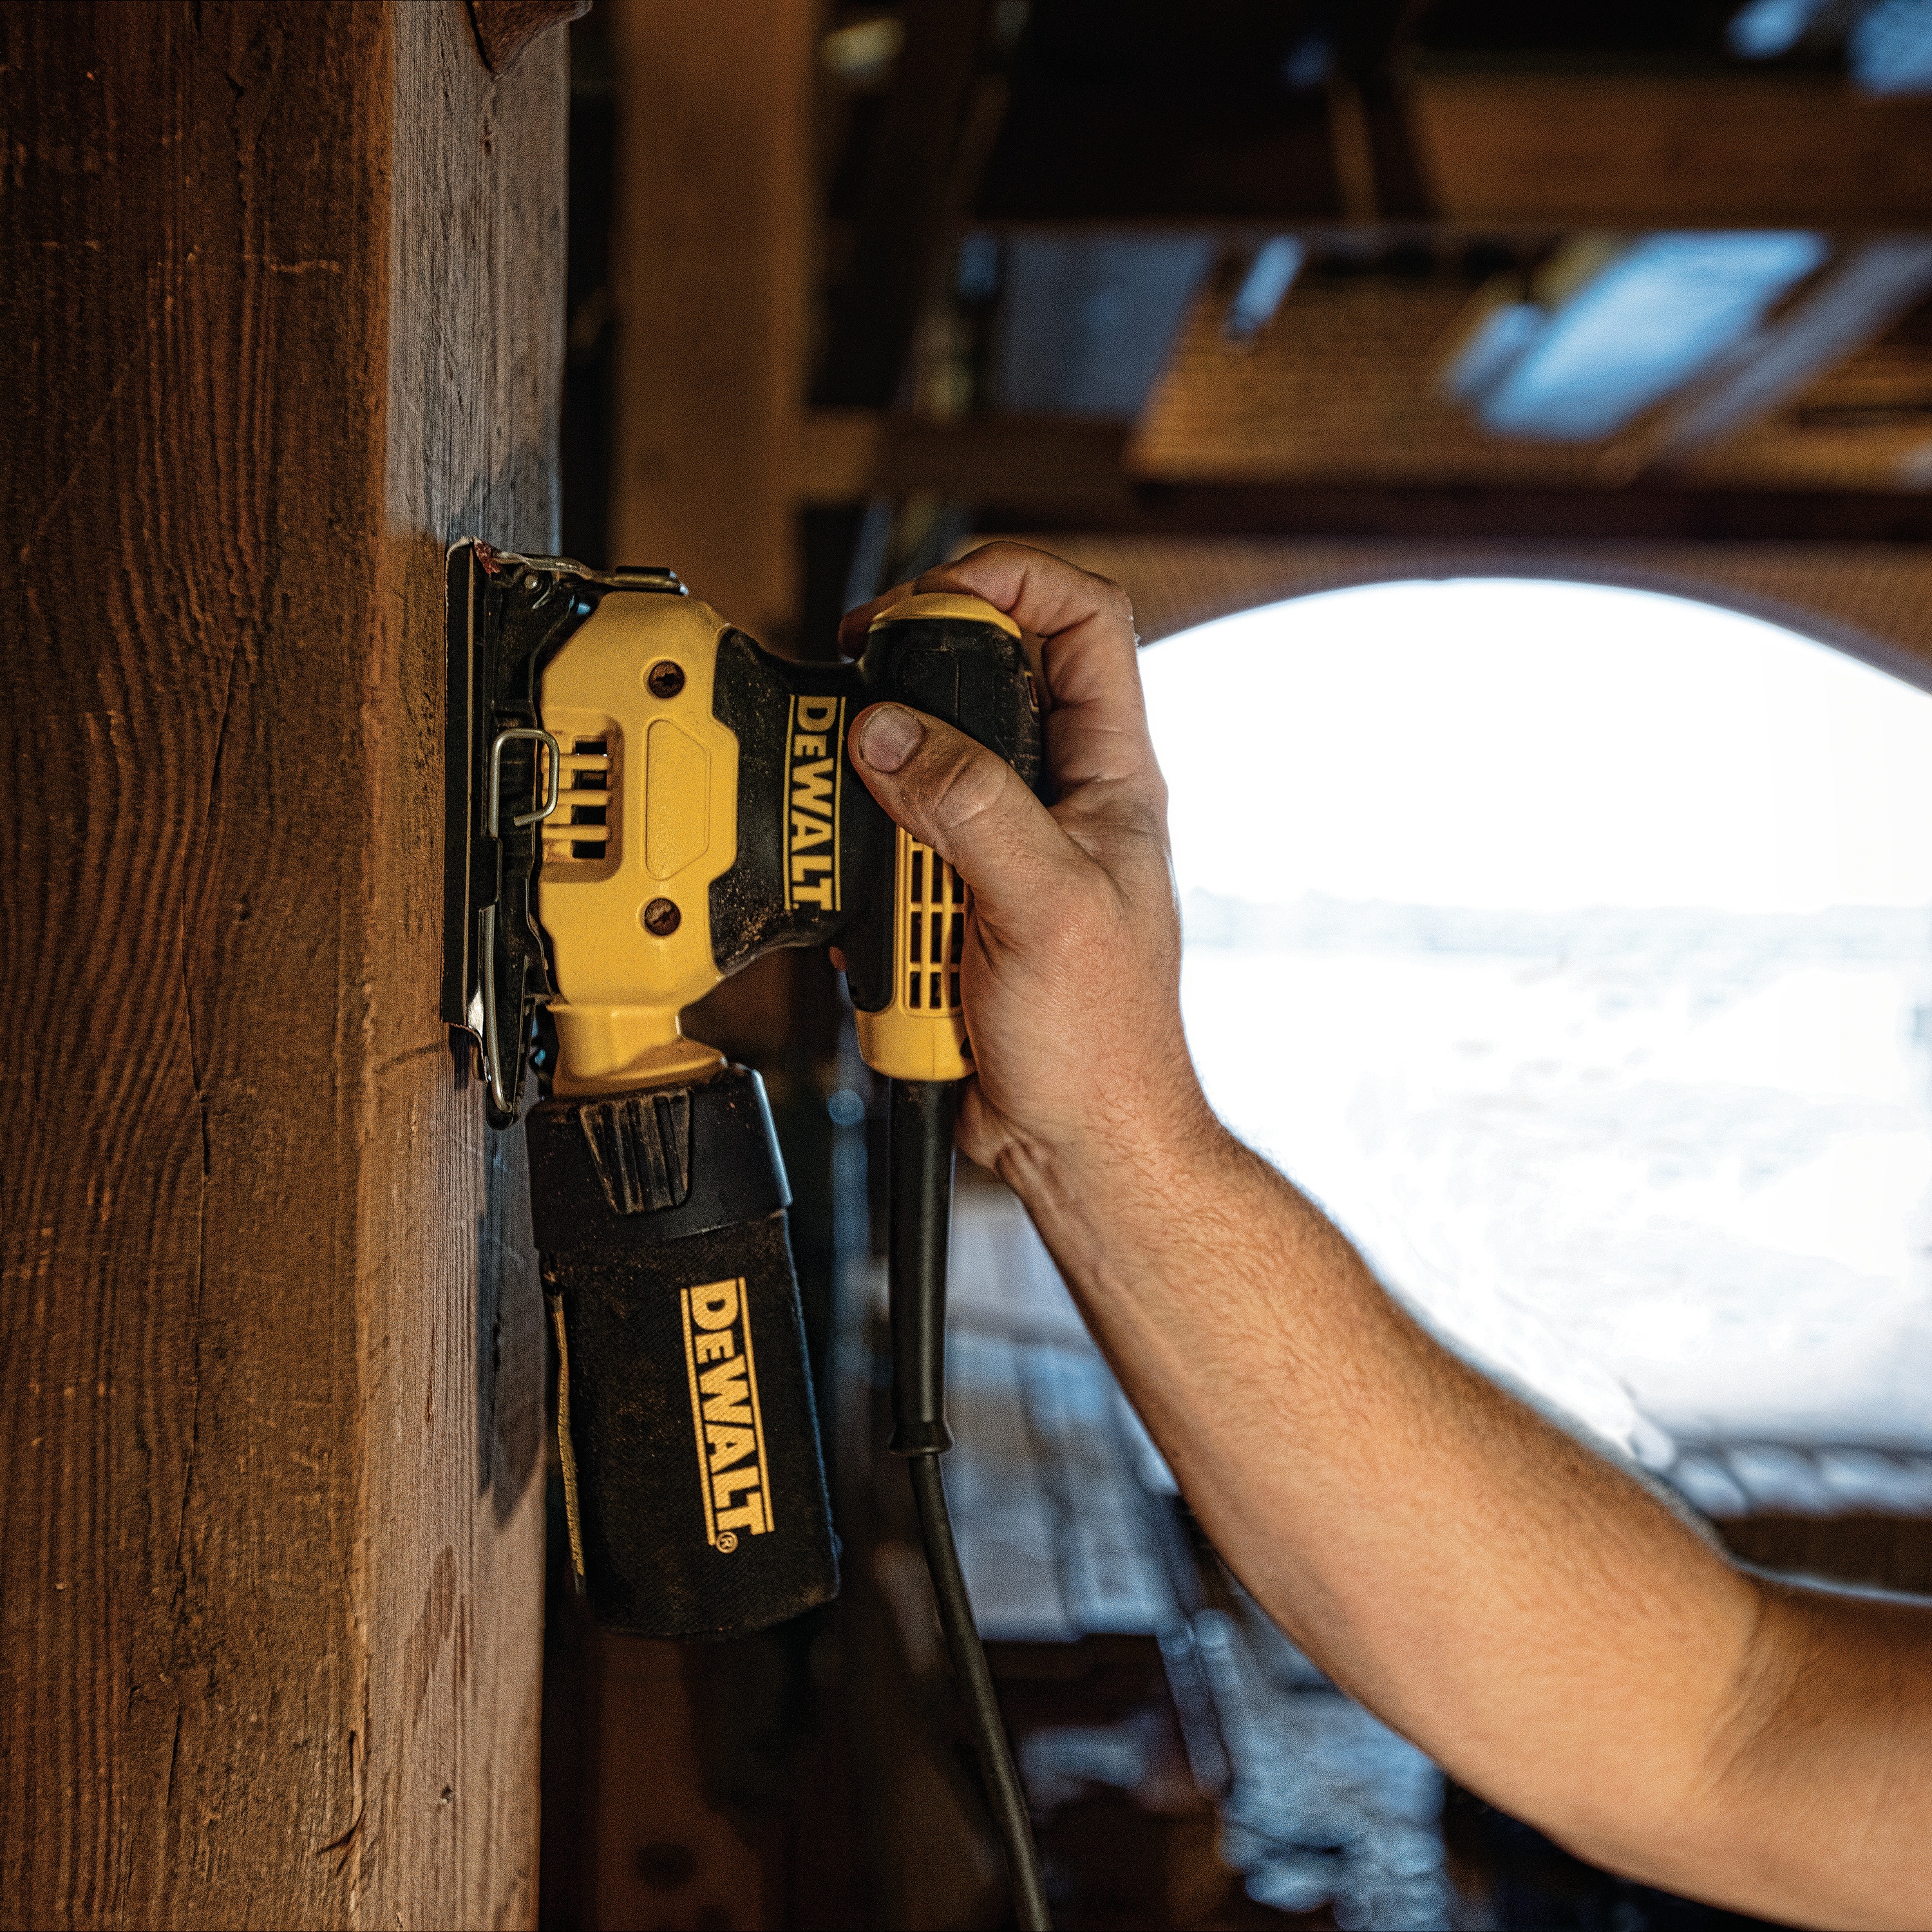 One quarter inch sheet palm grip sander sanding on a wooden wall at a worksite.